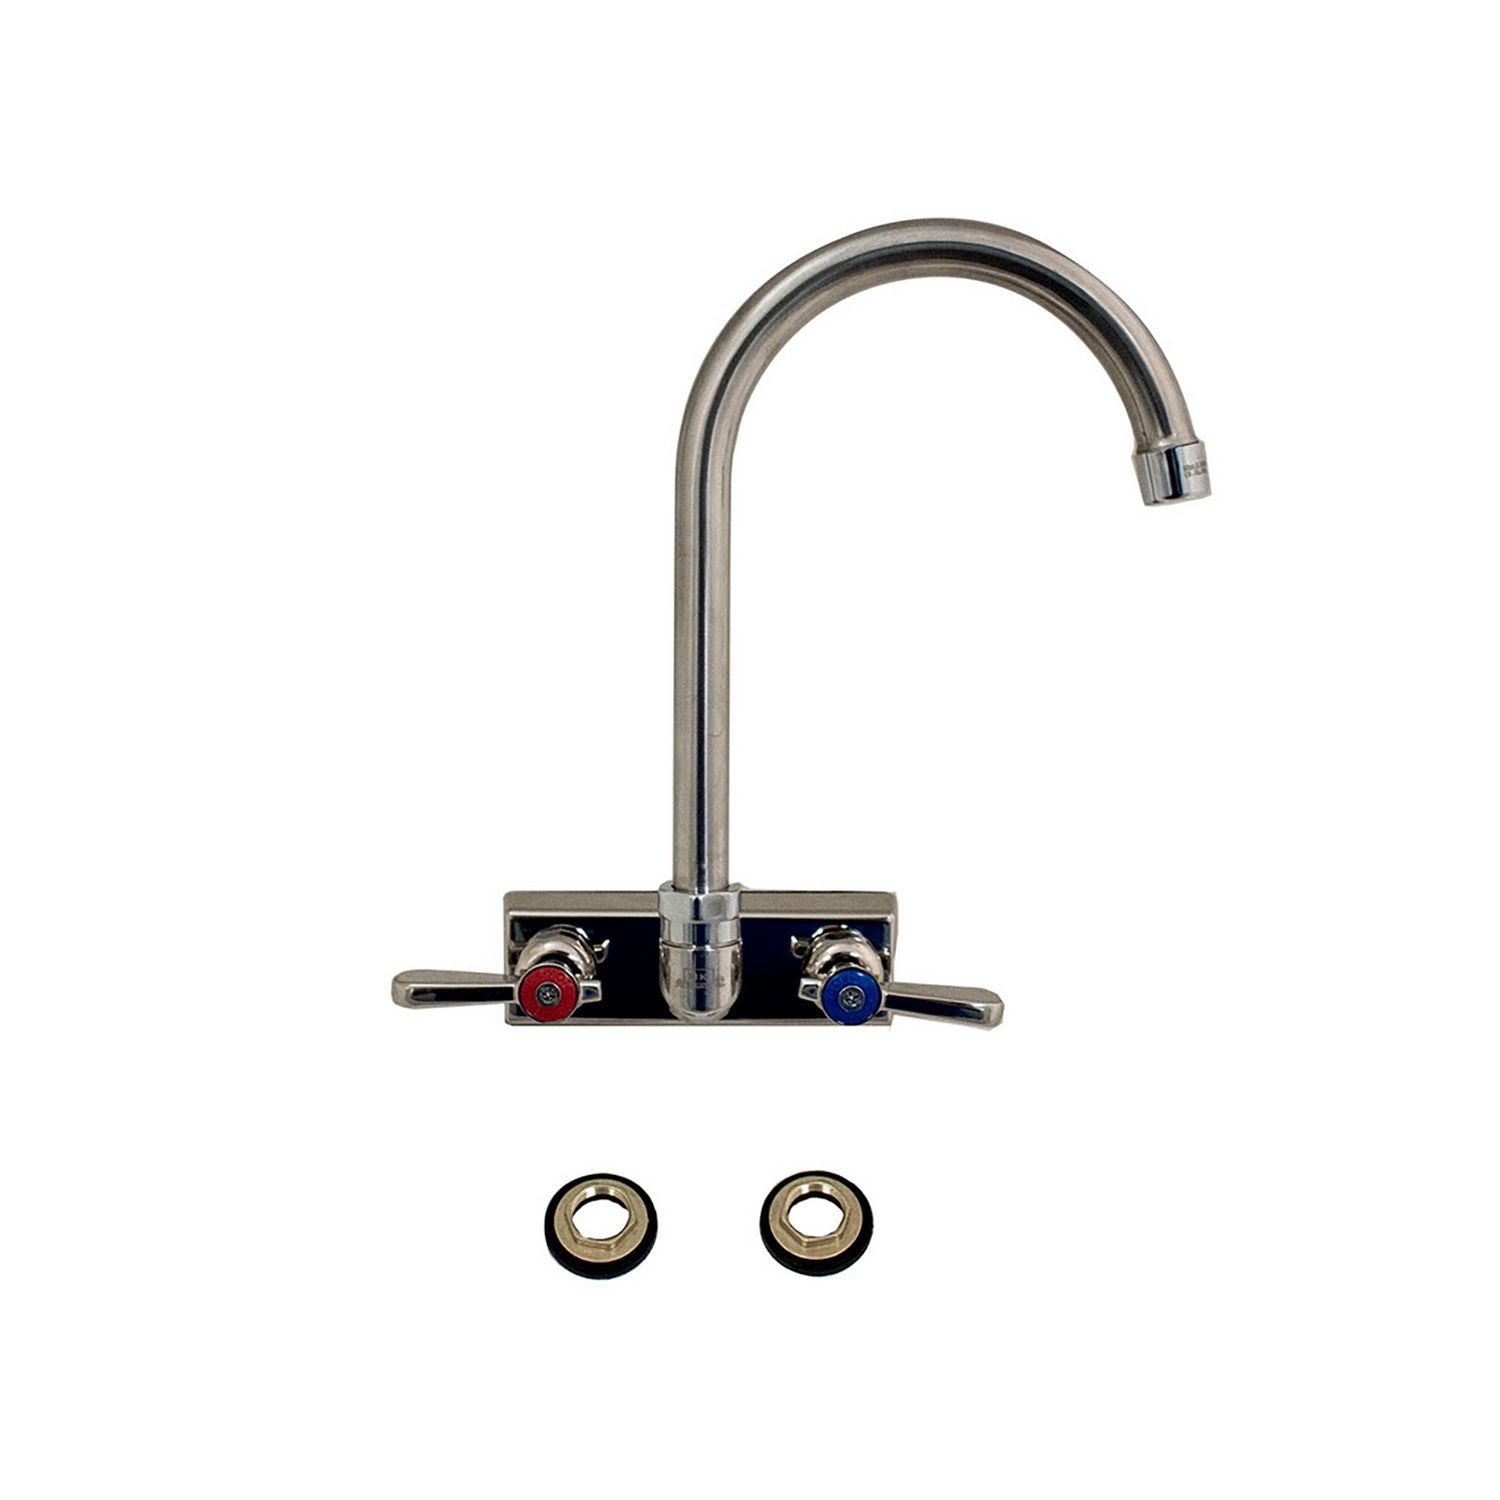 evolution-splash-mount-stainless-steel-faucet-1238-height-8-reach-stainless-steel-ships-in-4-6-business-days_bkeevo4sm8g - 1